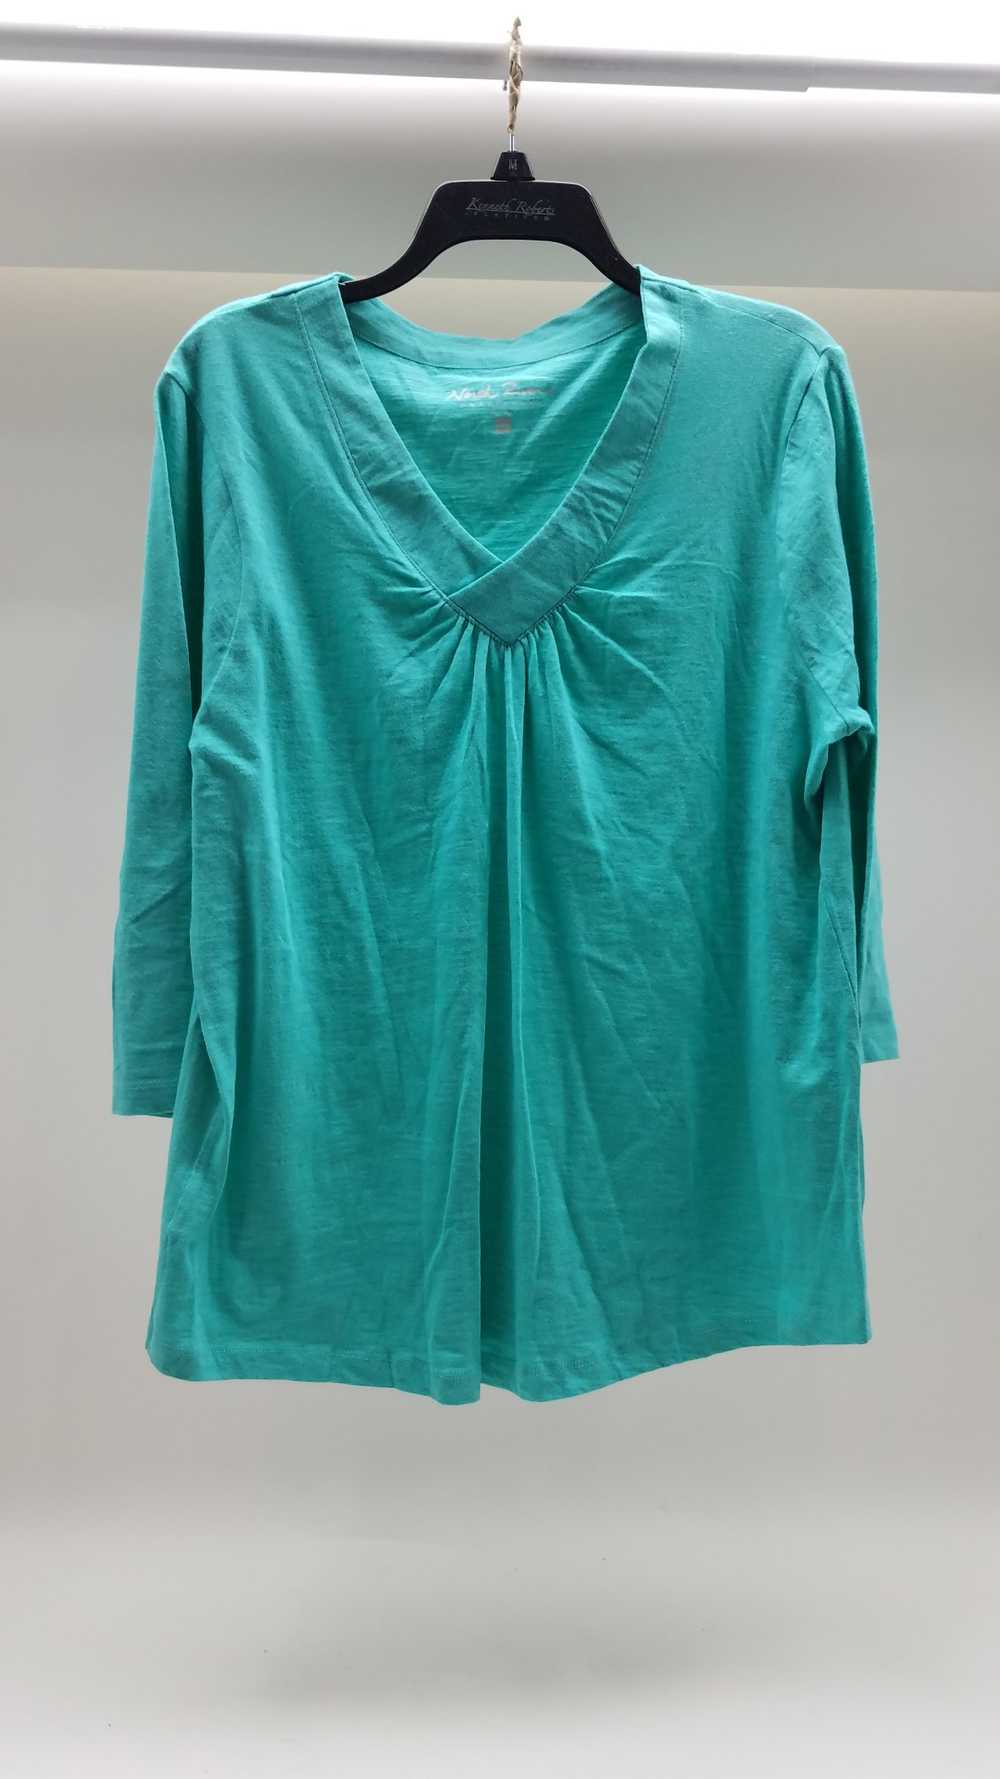 Women's NORTH RIVER Turquoise Blue Top XL - image 1